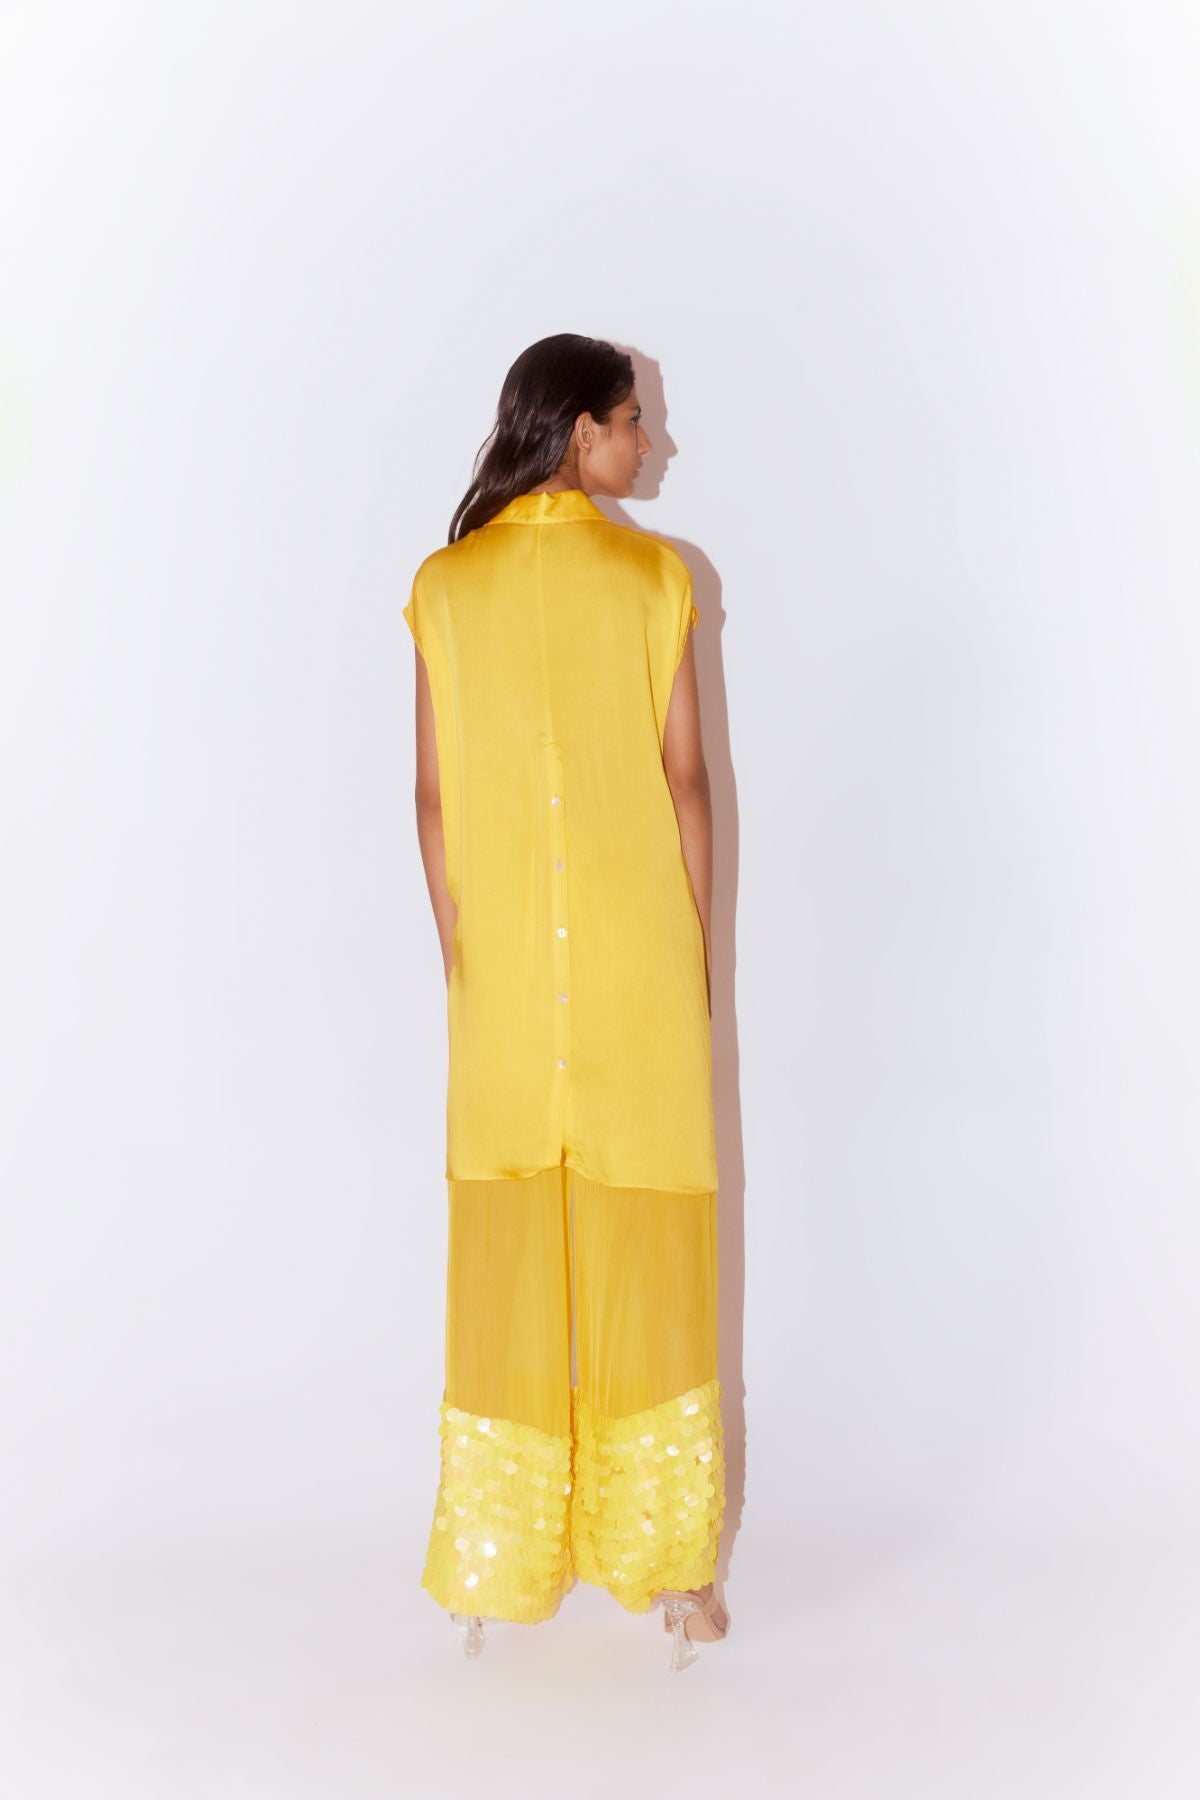 Aspen Organza Embroidered Trousers (Yellow)